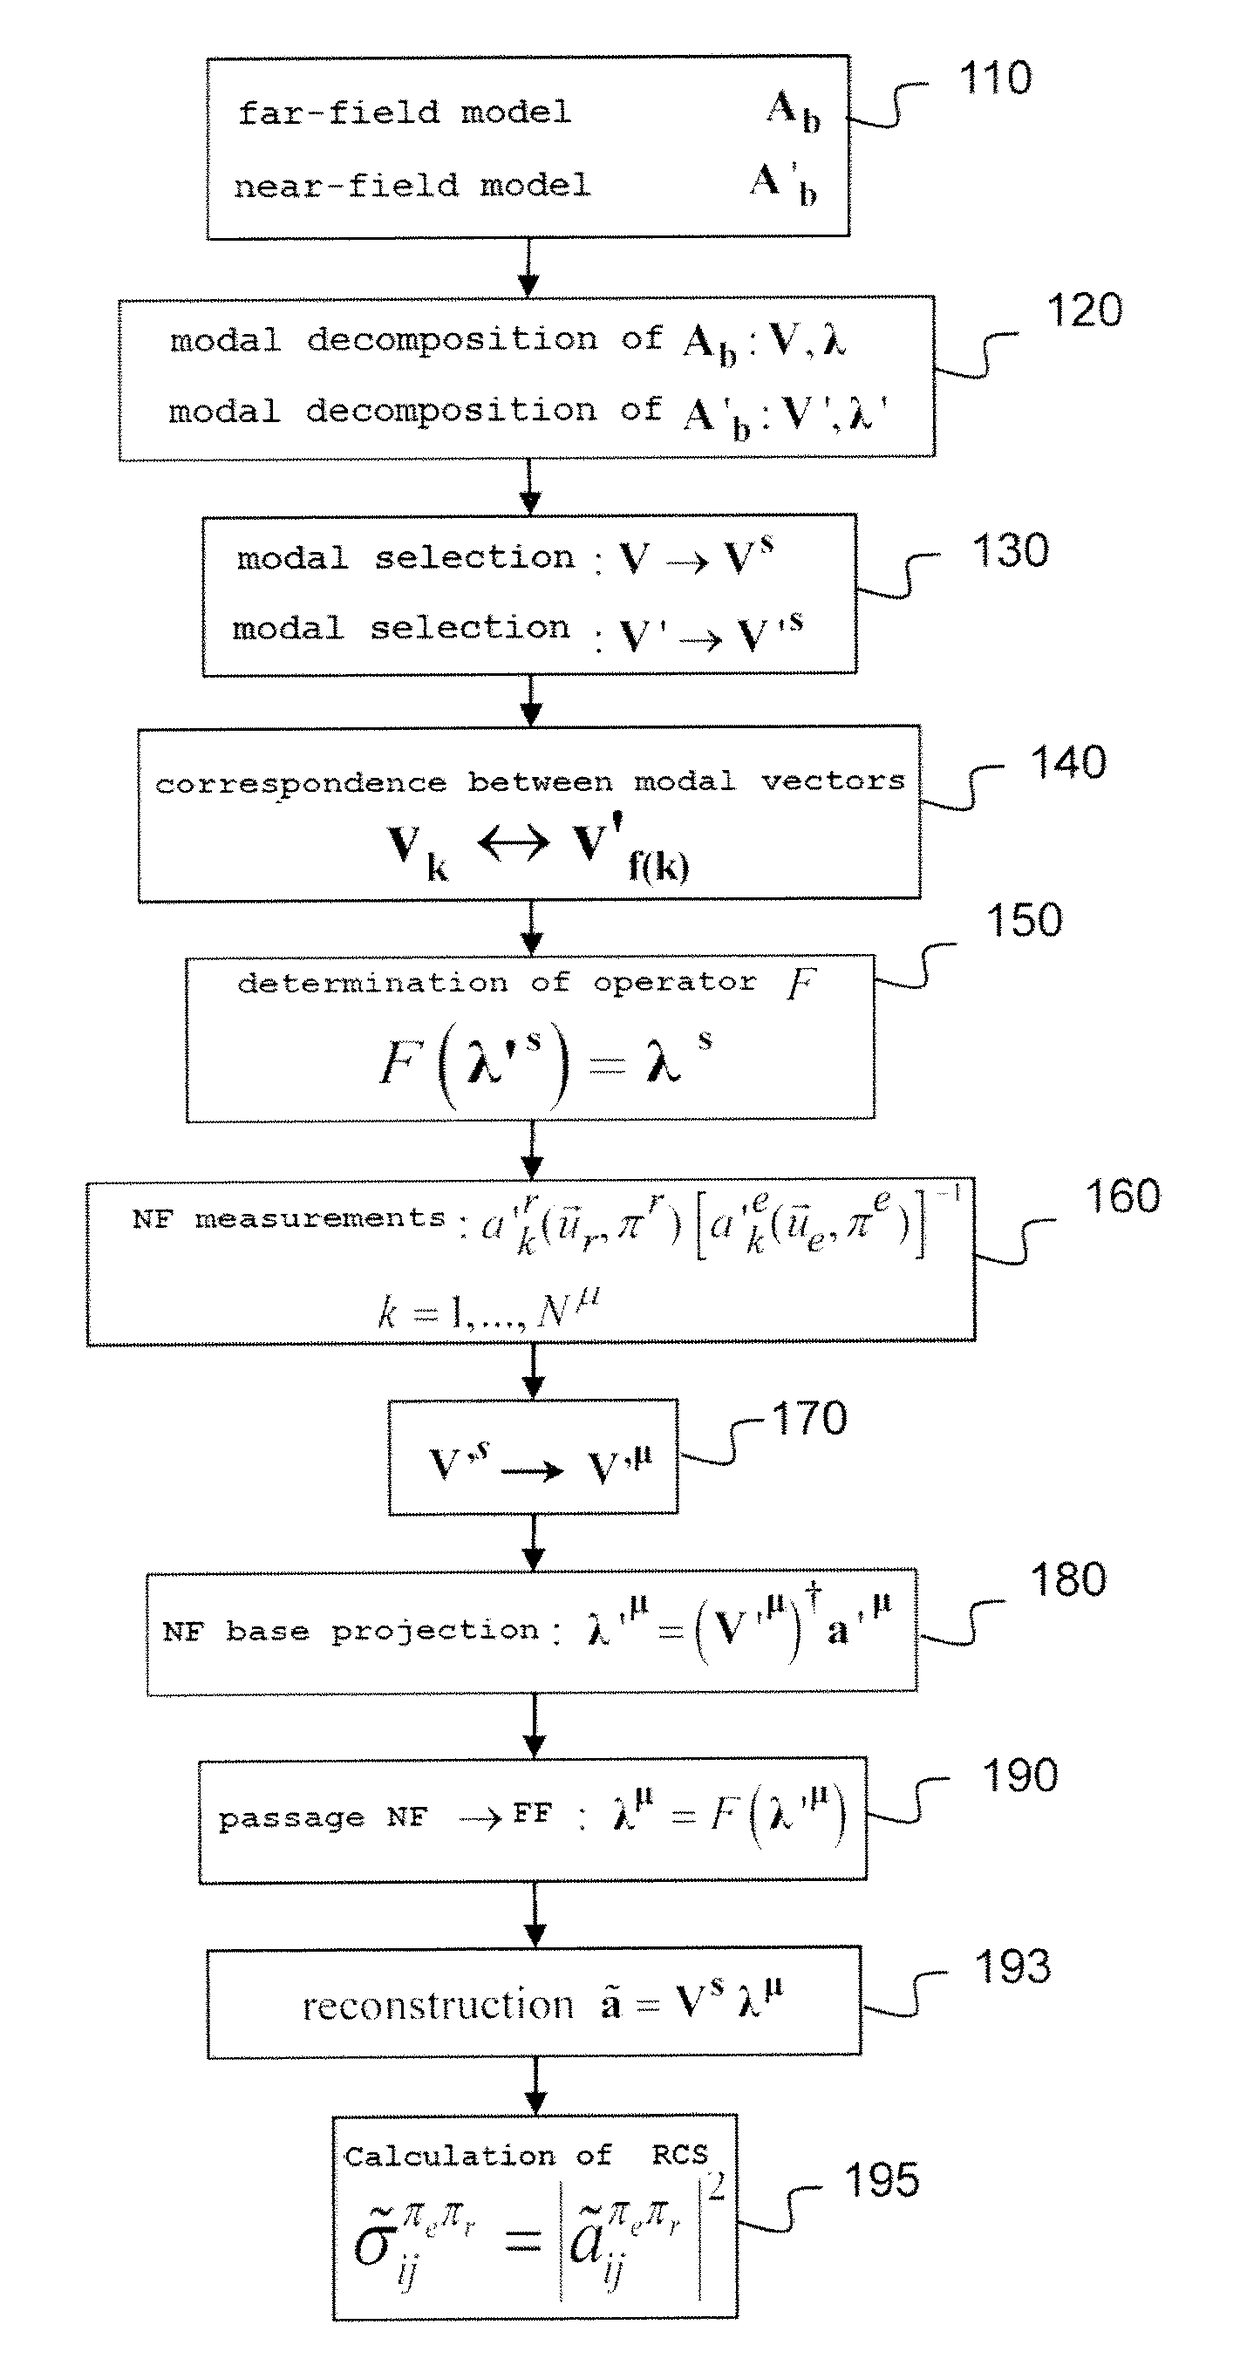 Method of estimating equivalent radar cross section on the basis of near-field measurements